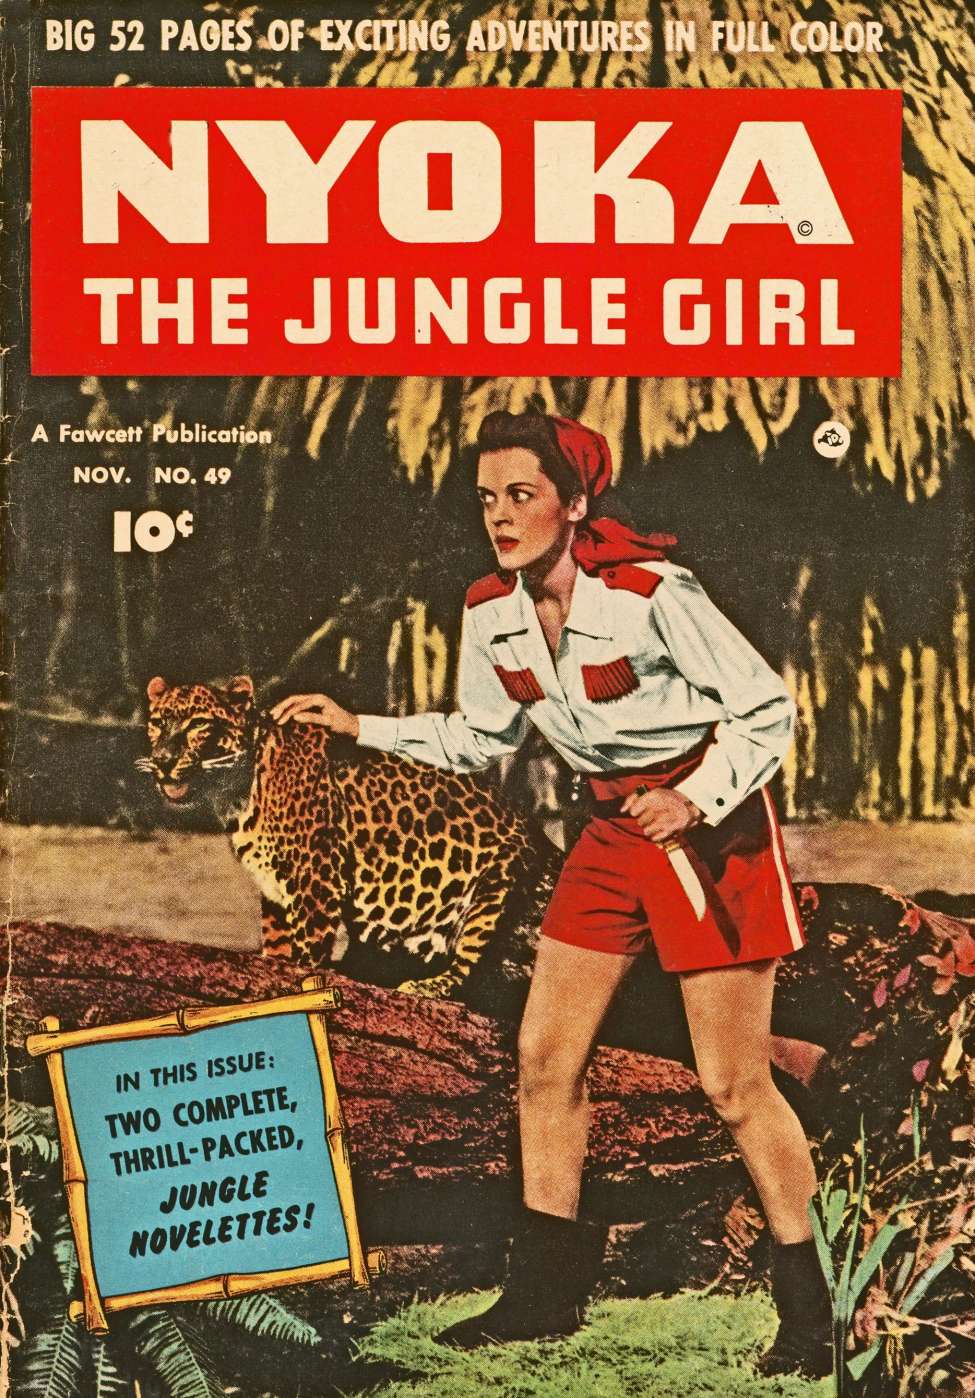 Book Cover For Nyoka the Jungle Girl 49 - Version 2